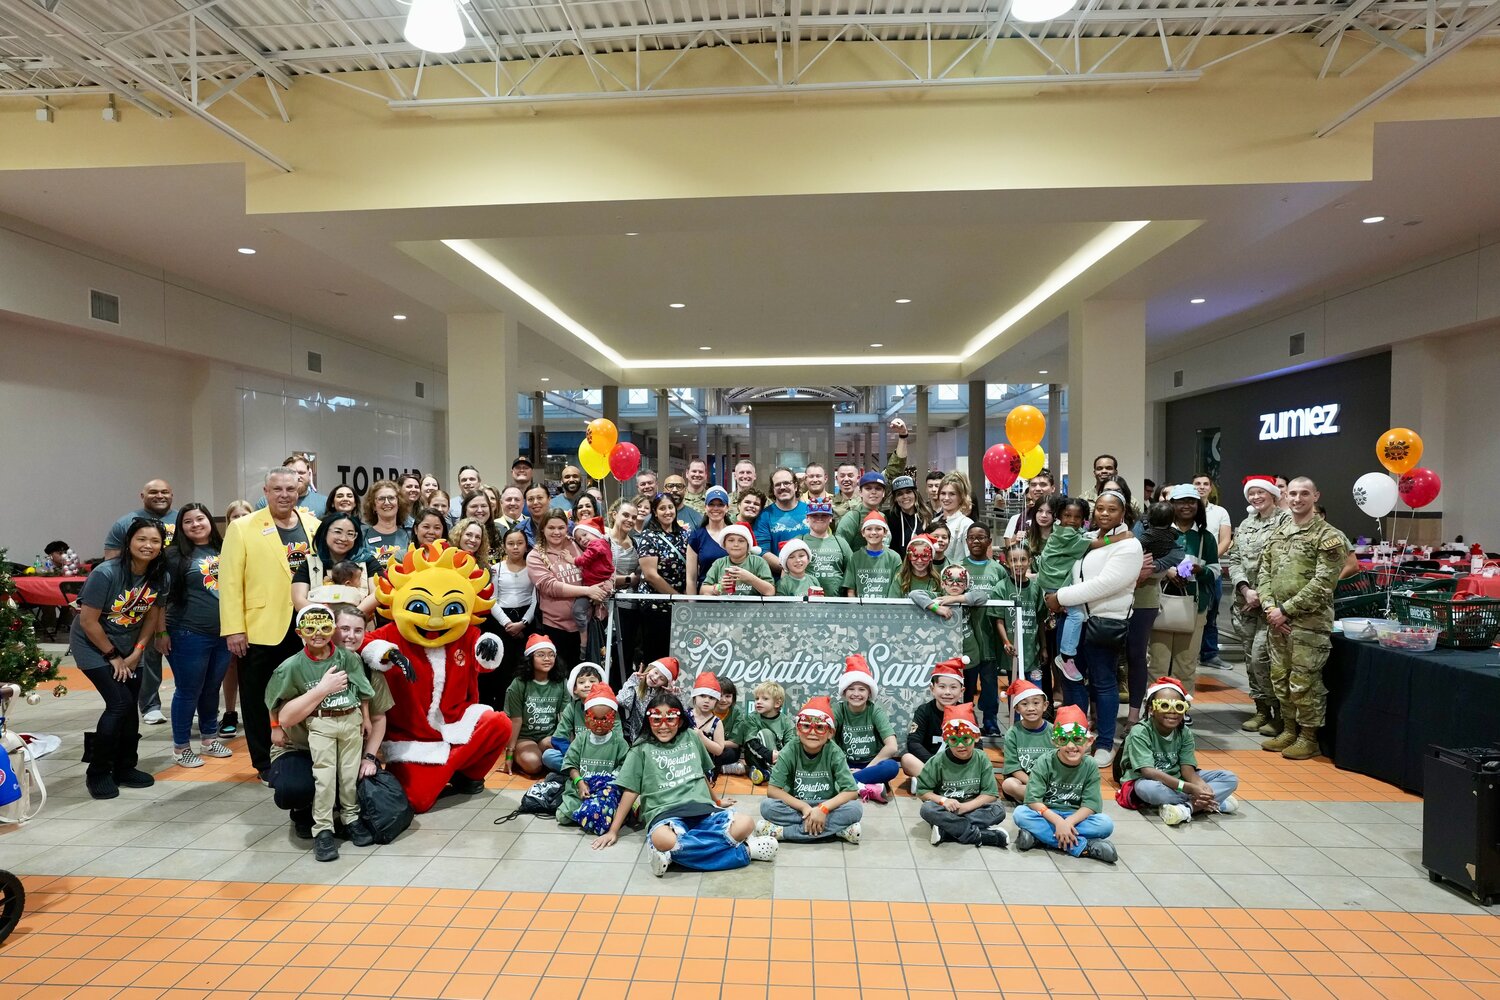 A group of 40 children of deployed parents from Luke Air Force Base came together for the seventh annual Operation Santa shopping spree Dec. 7 in Glendale. Fiesta Bowl Charities teams up with Dick’s Sporting Goods and Fighter Country Foundation for the holiday event.